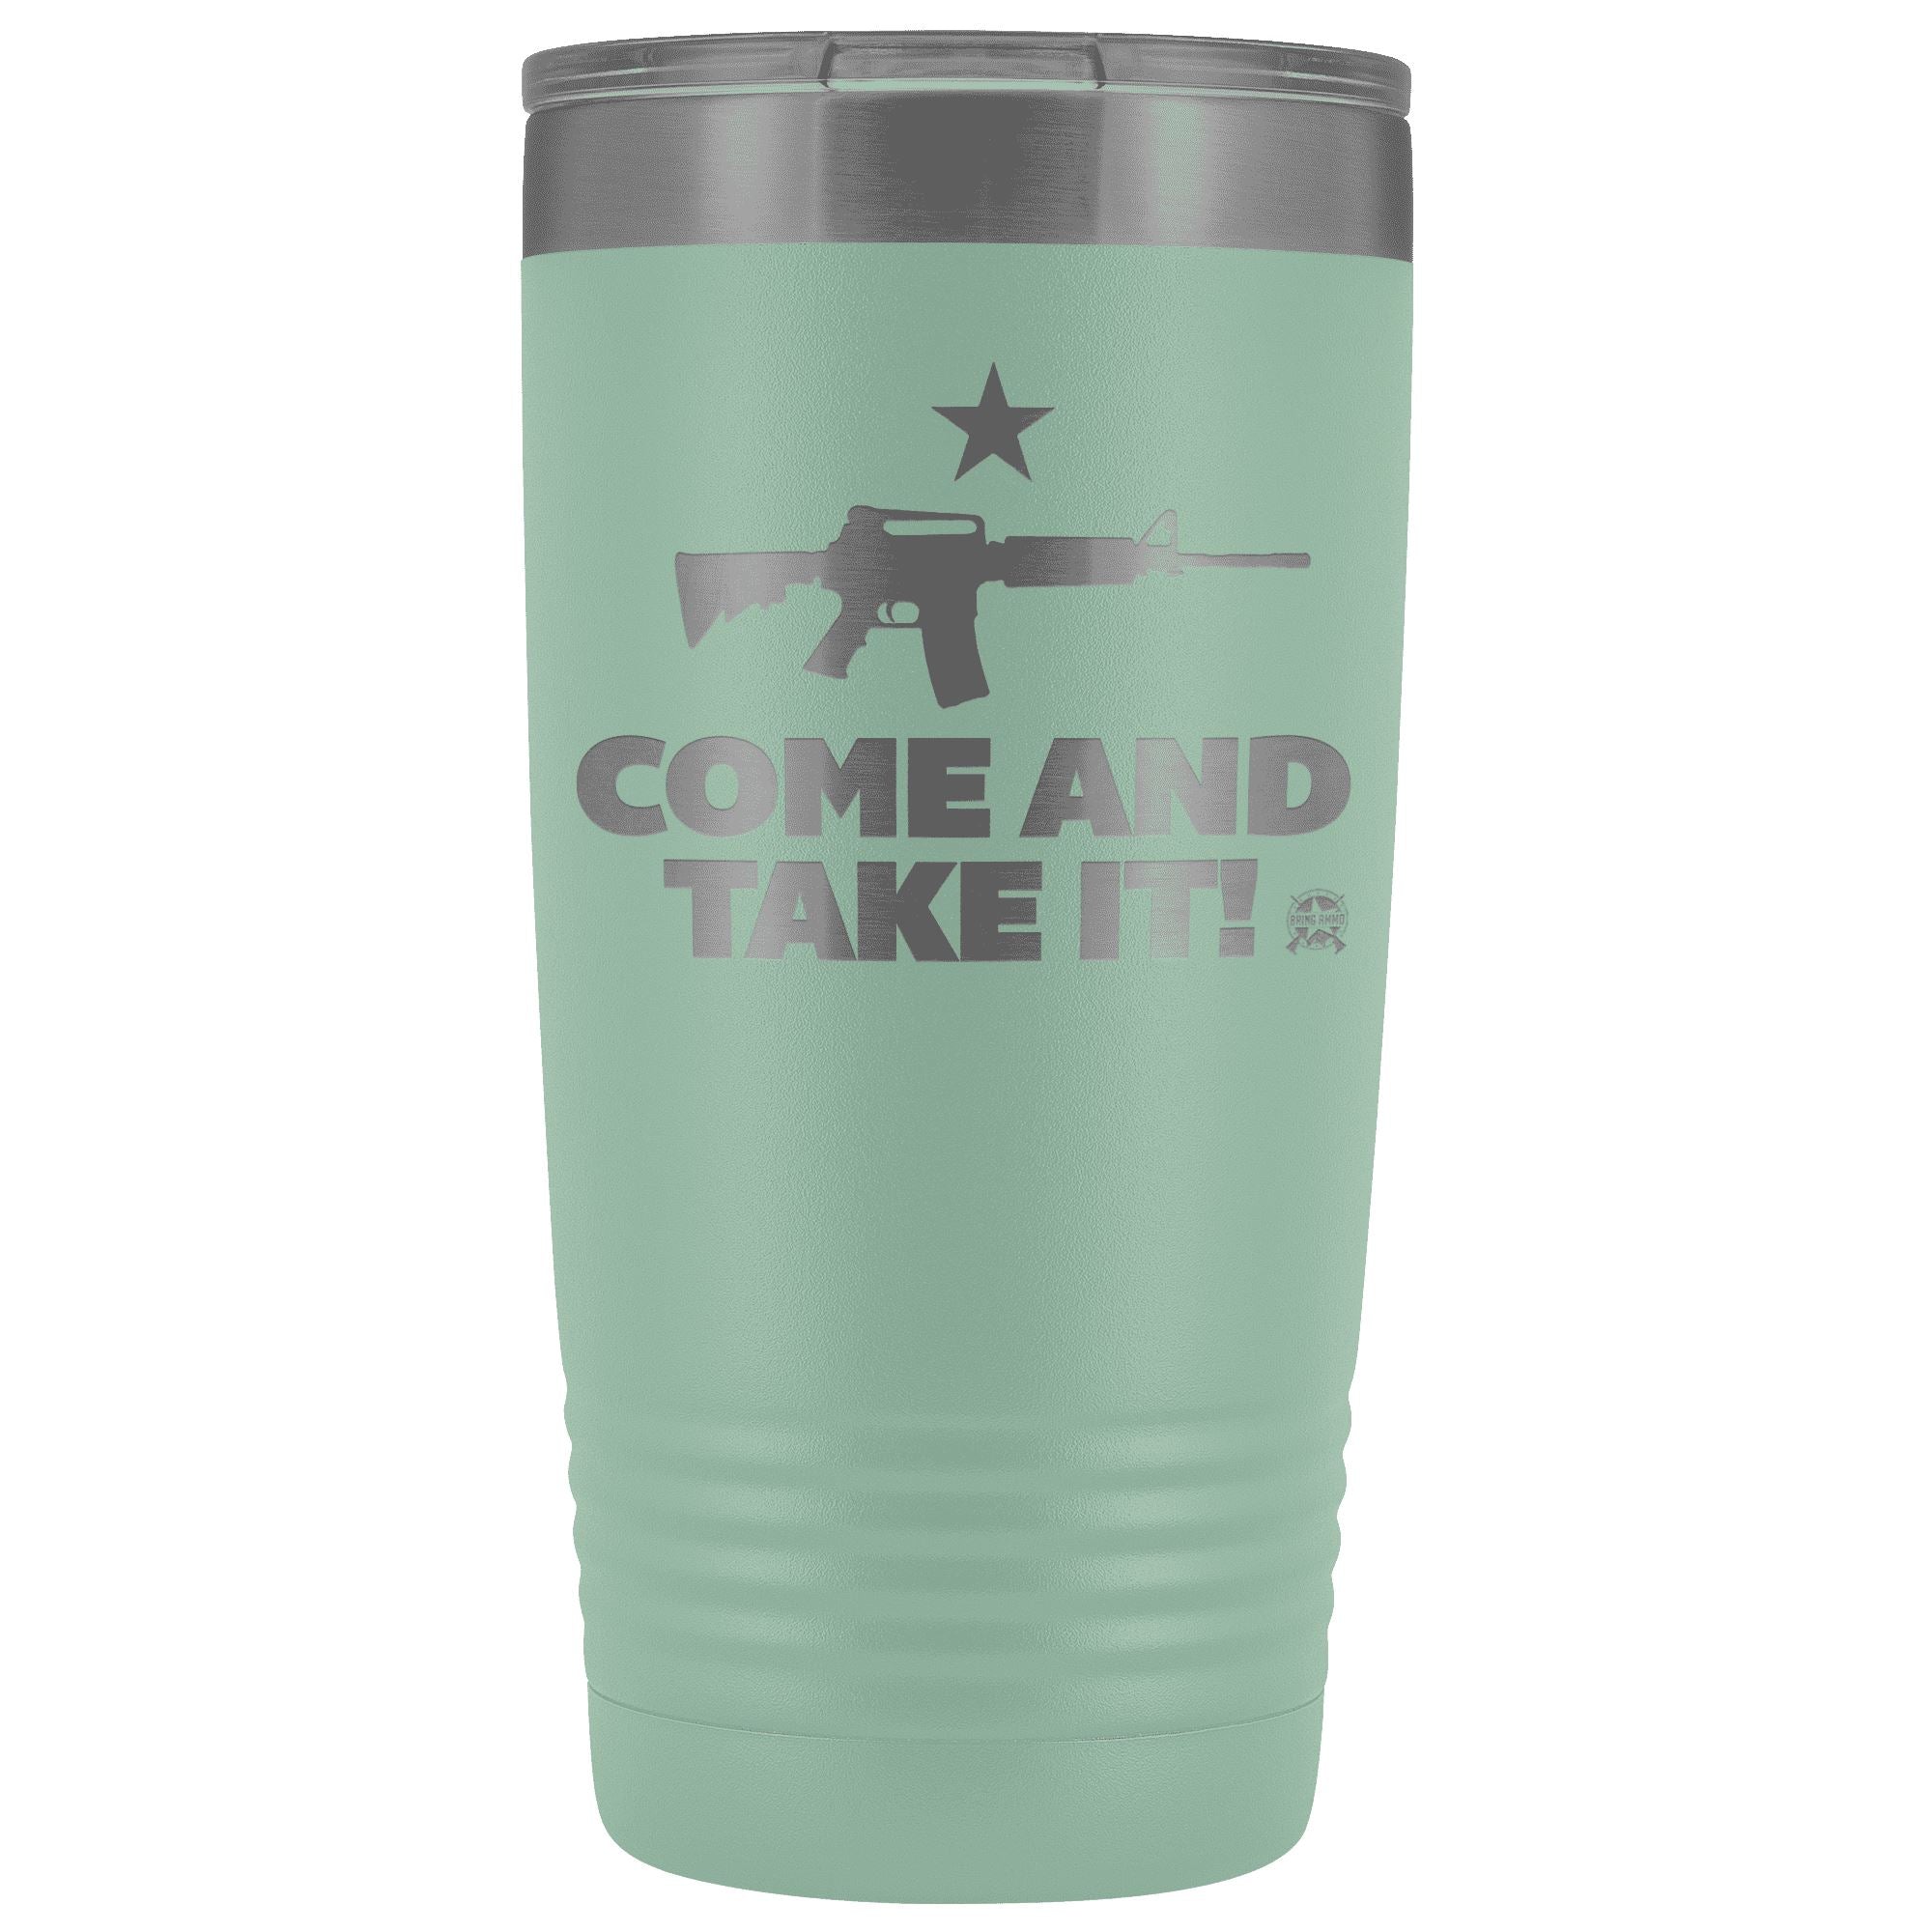 Come and Take It Stainless Etched Tumbler Tumblers Teal 